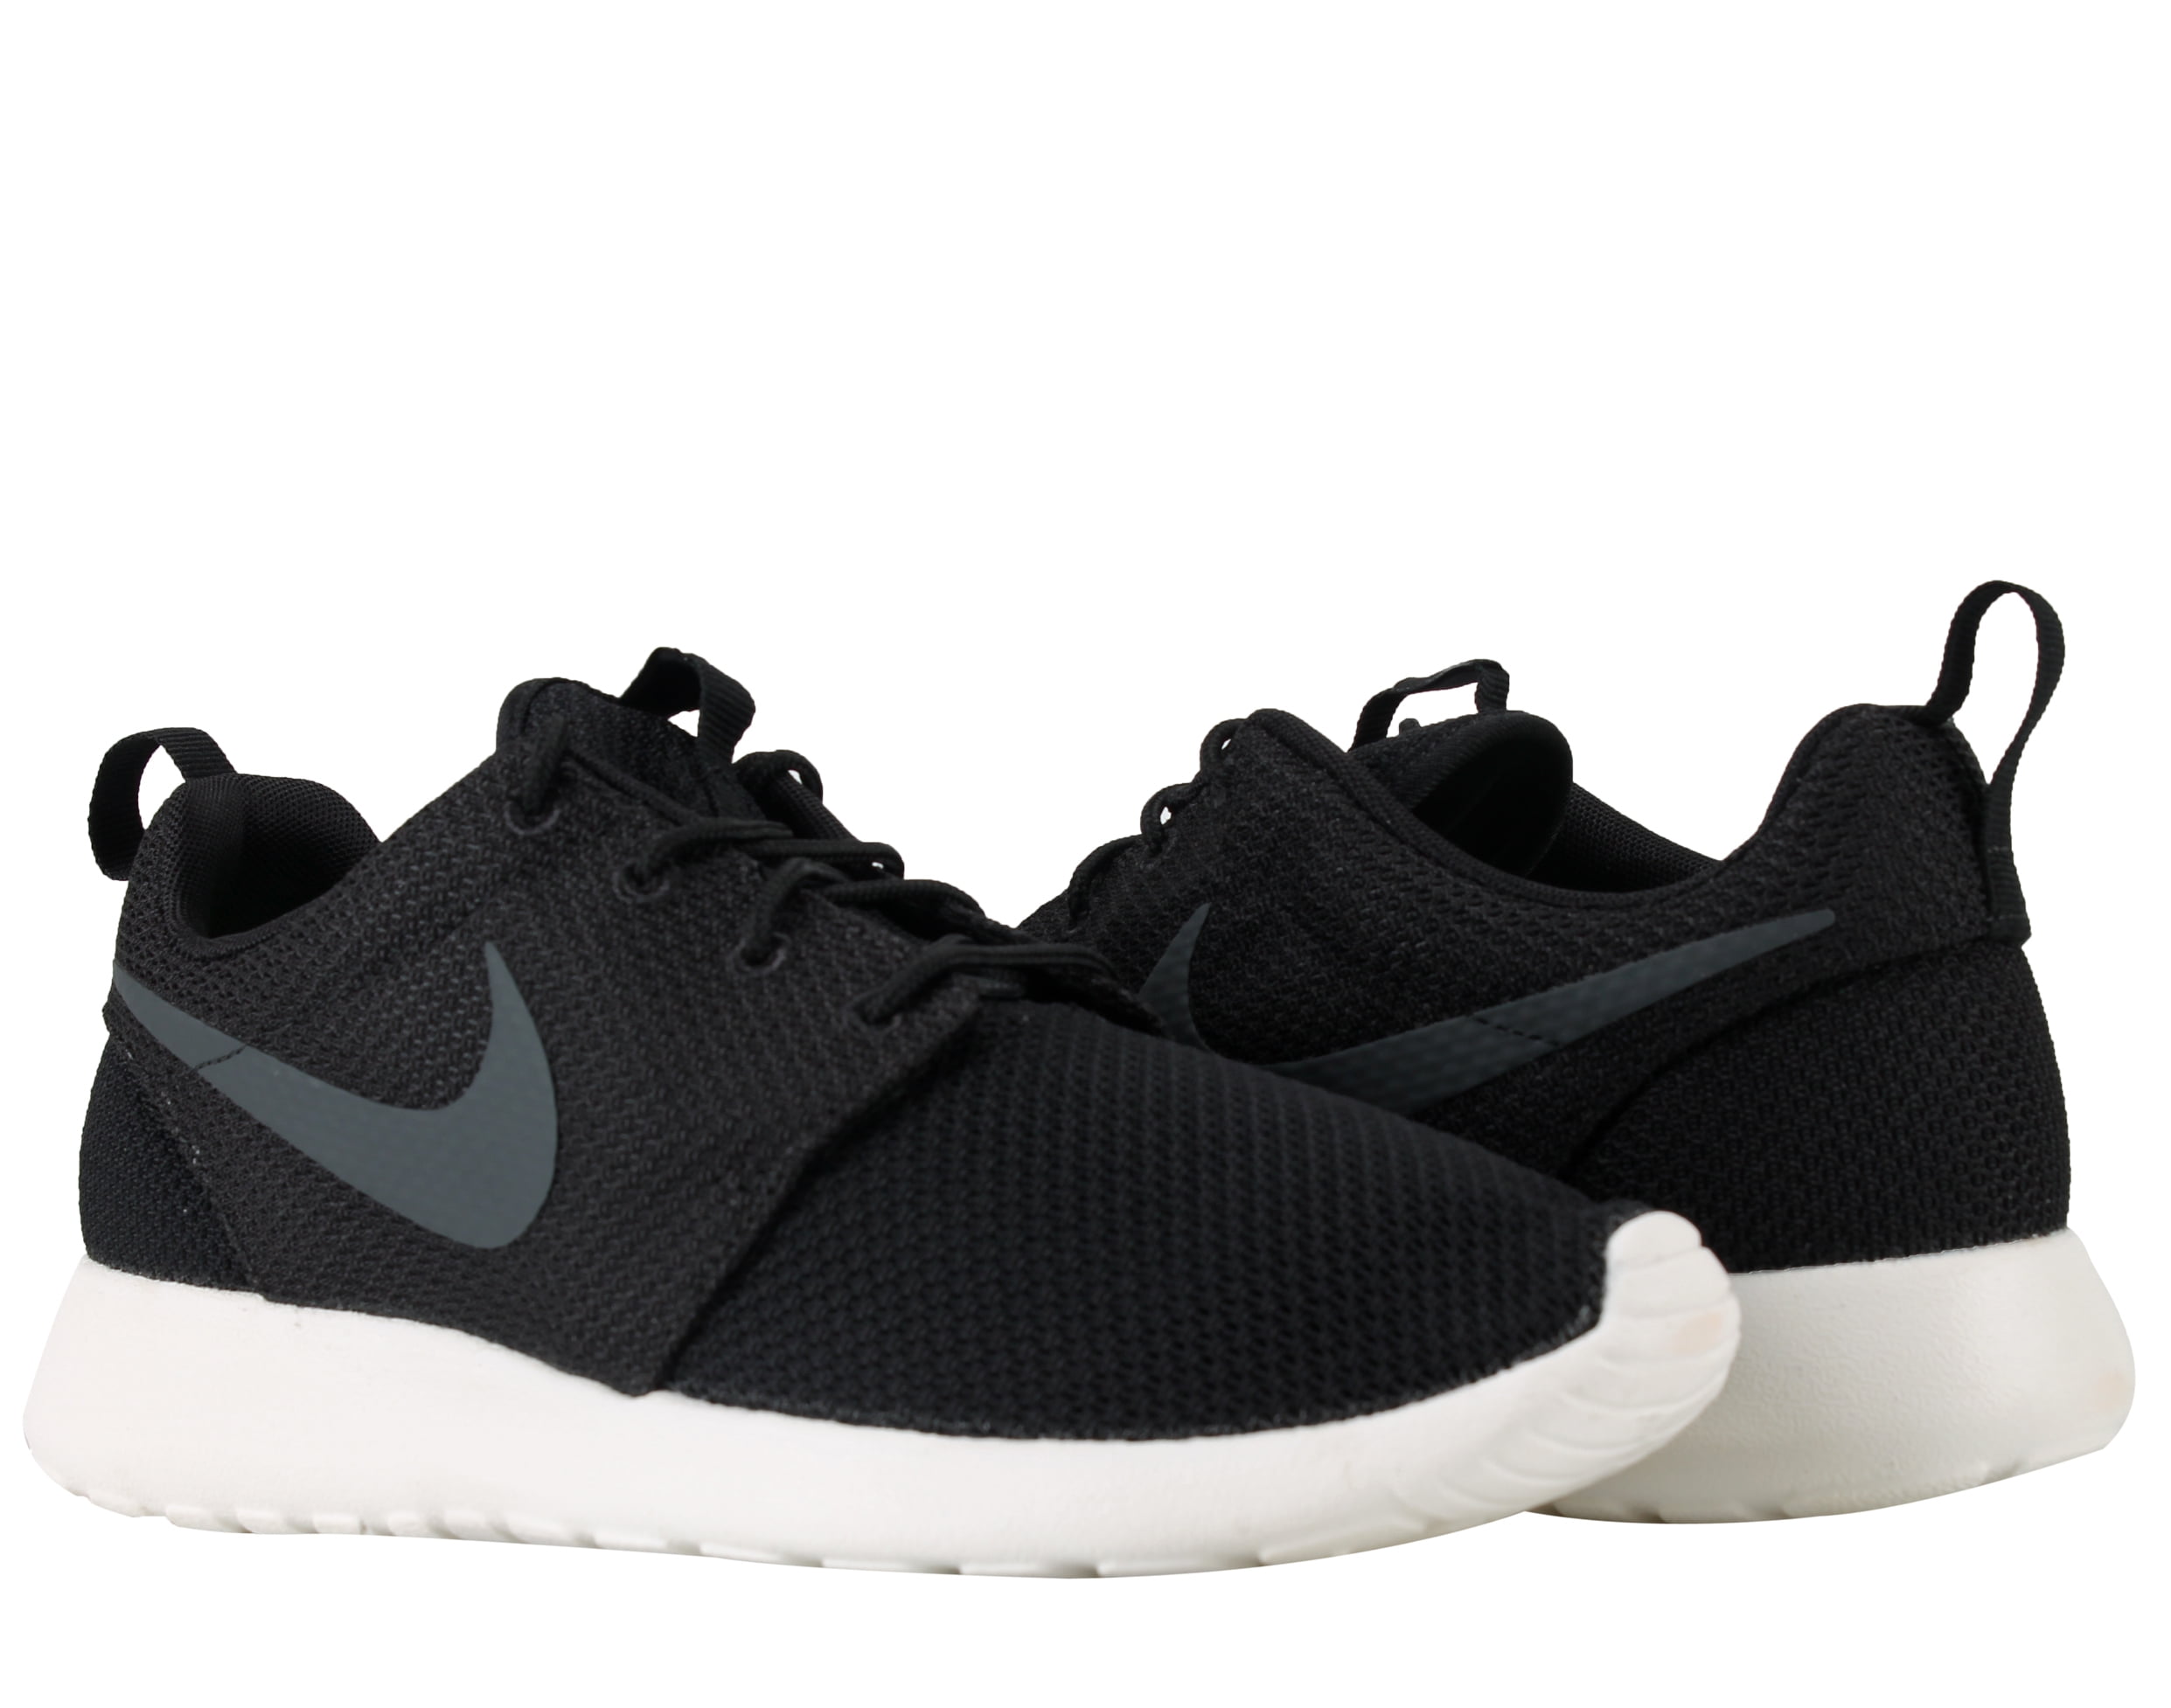 Roshe Run One Shoes Black/Anthracite-Sail 511881-010 -